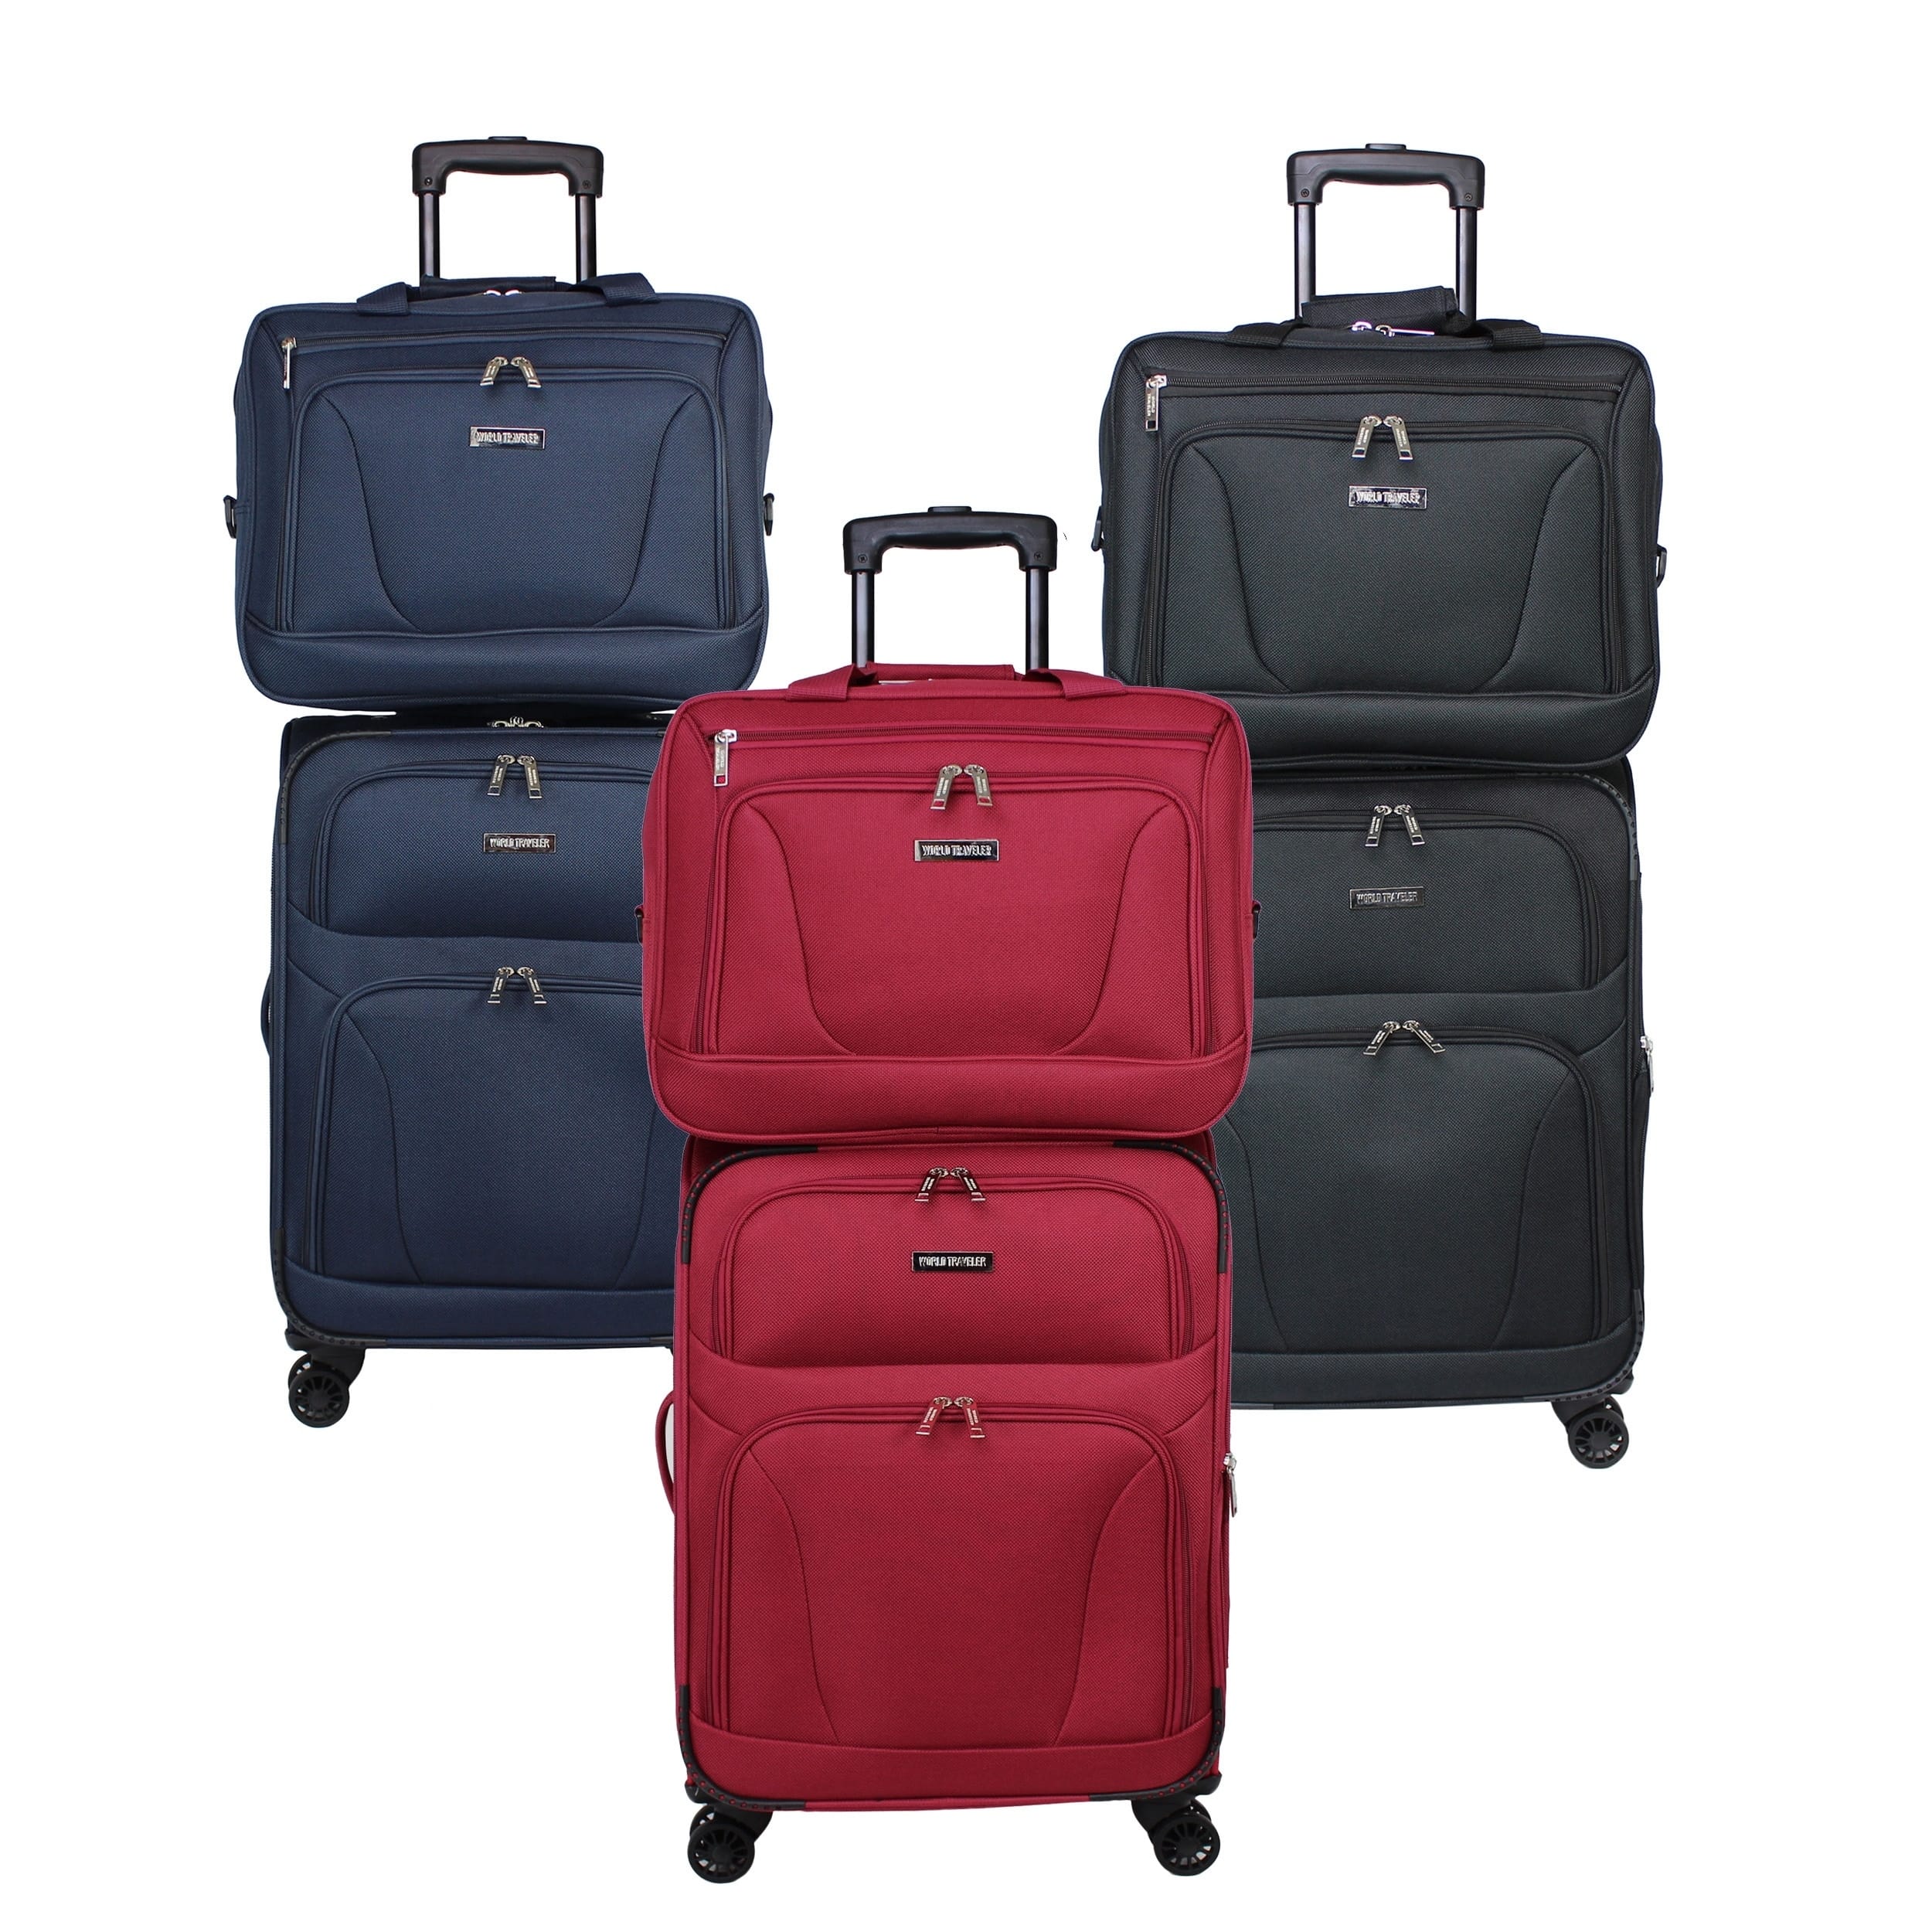 Buy Two-piece Sets Online at Overstock | Our Best Luggage Sets Deals